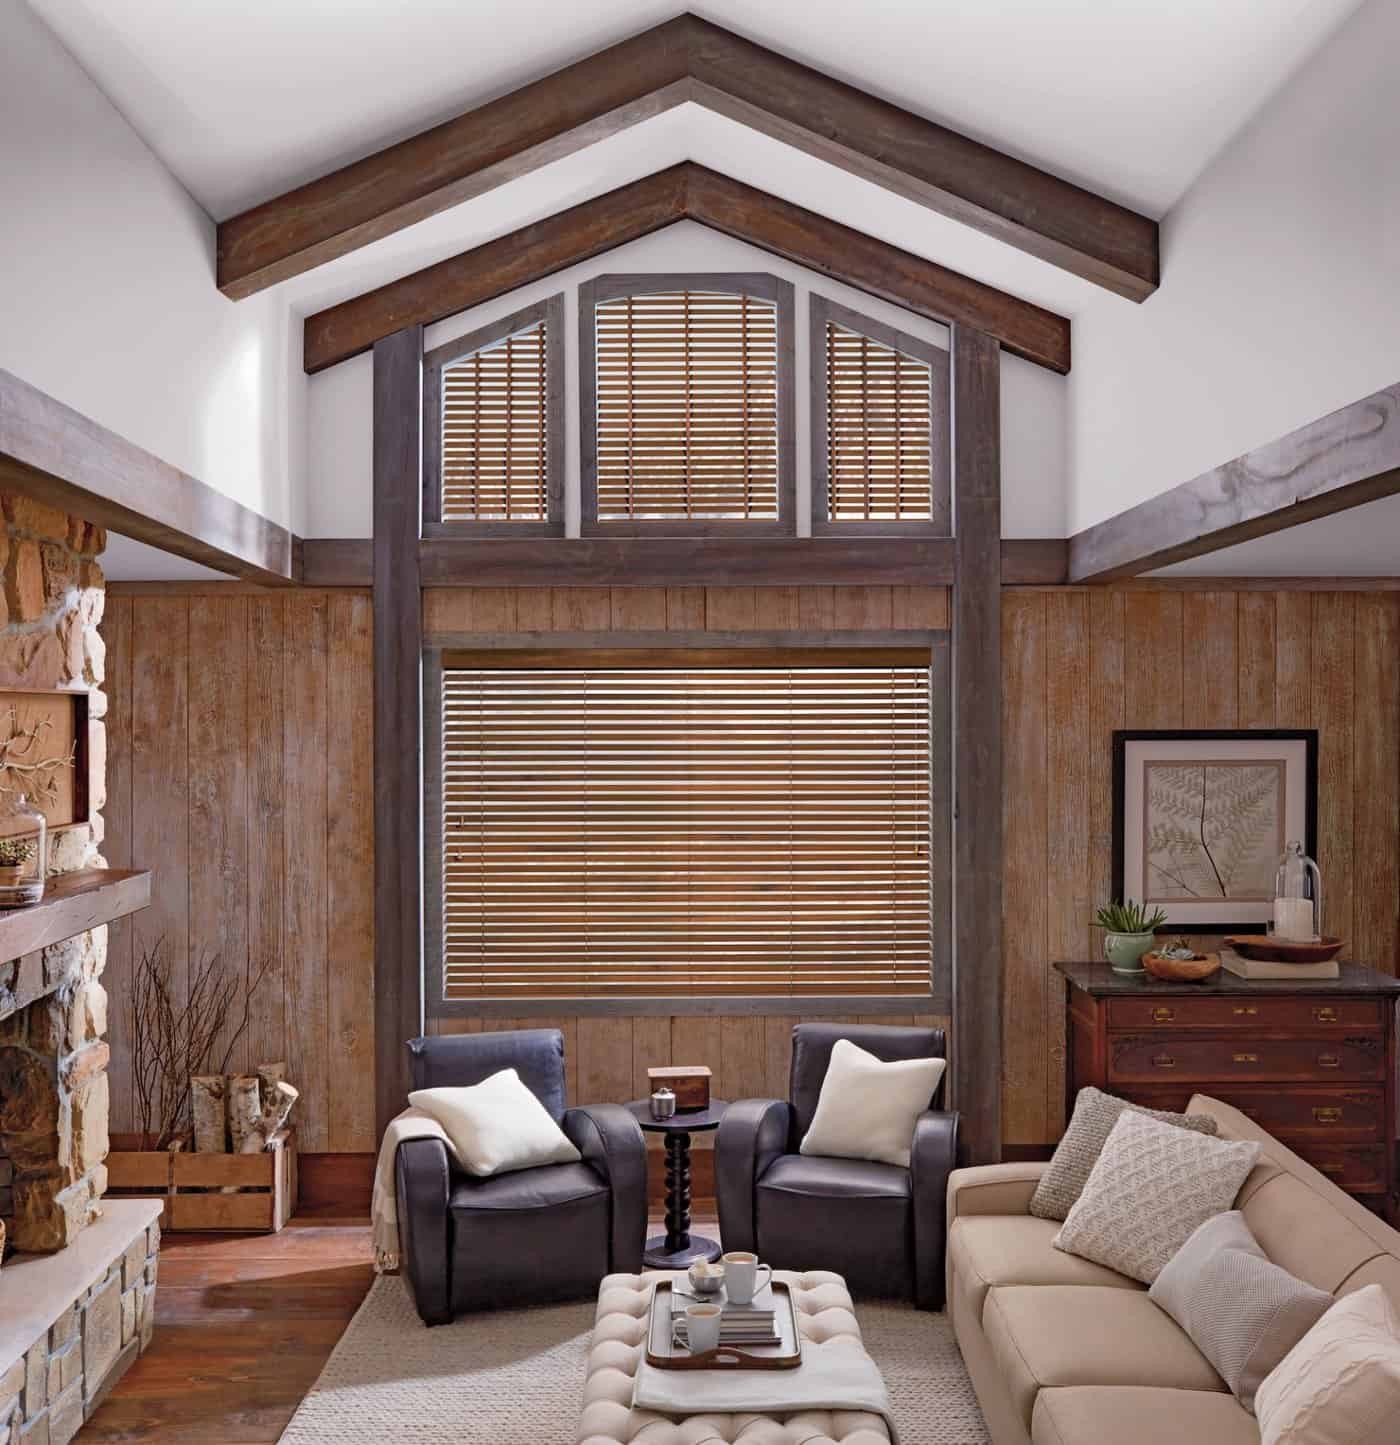 After Parkland Wood Blinds for Angled Living Room Windows in Homes Near San Diego, California (CA)